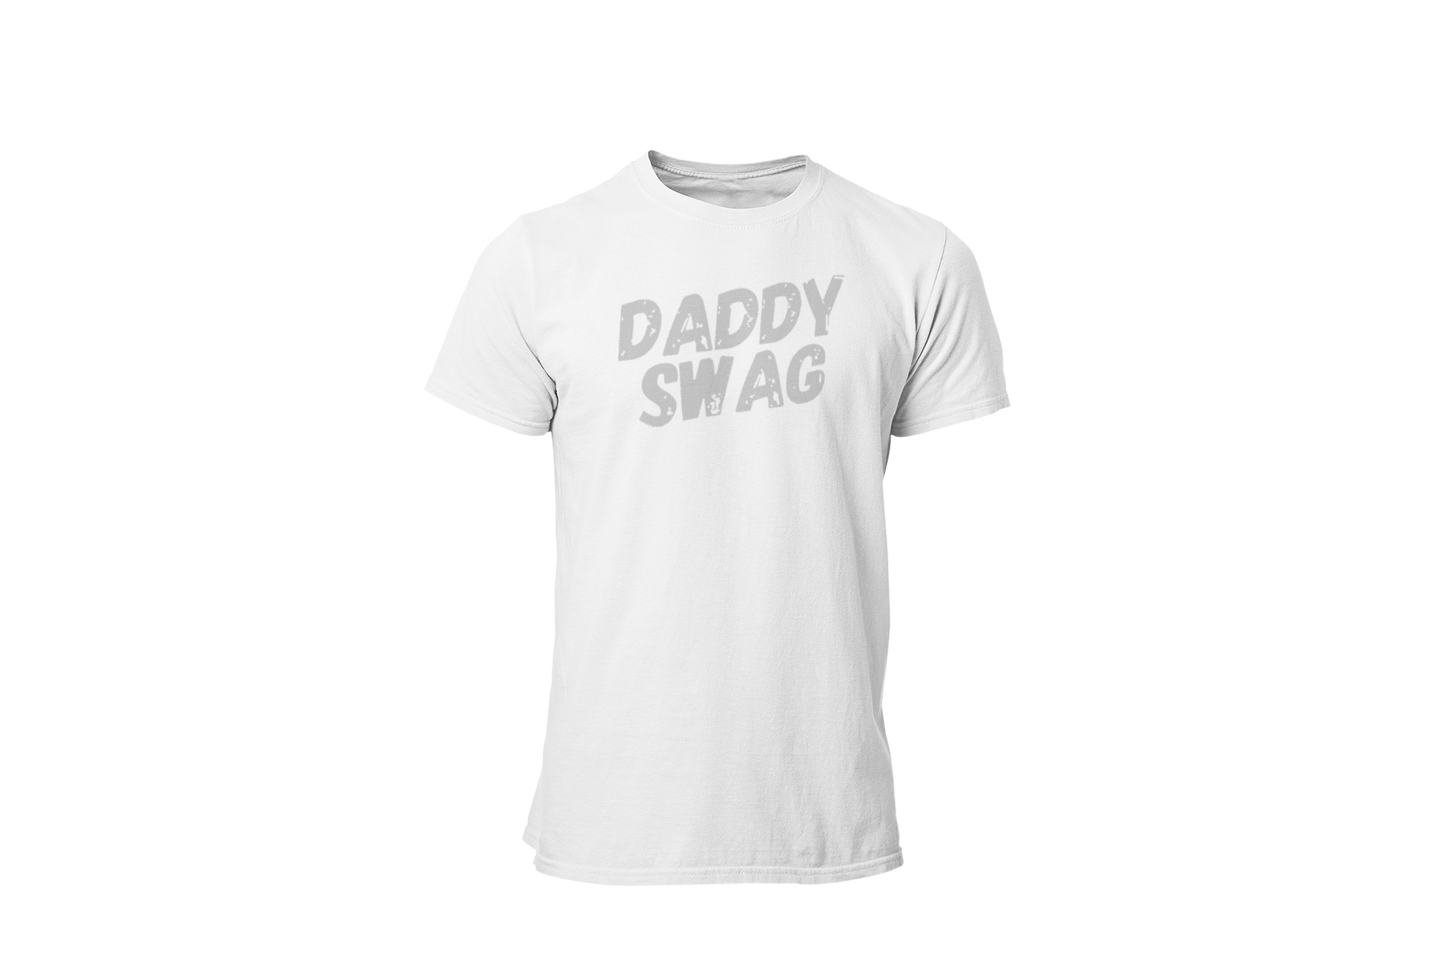 DADDY SWAG STRESS FREE COLLECTION T-SHIRT